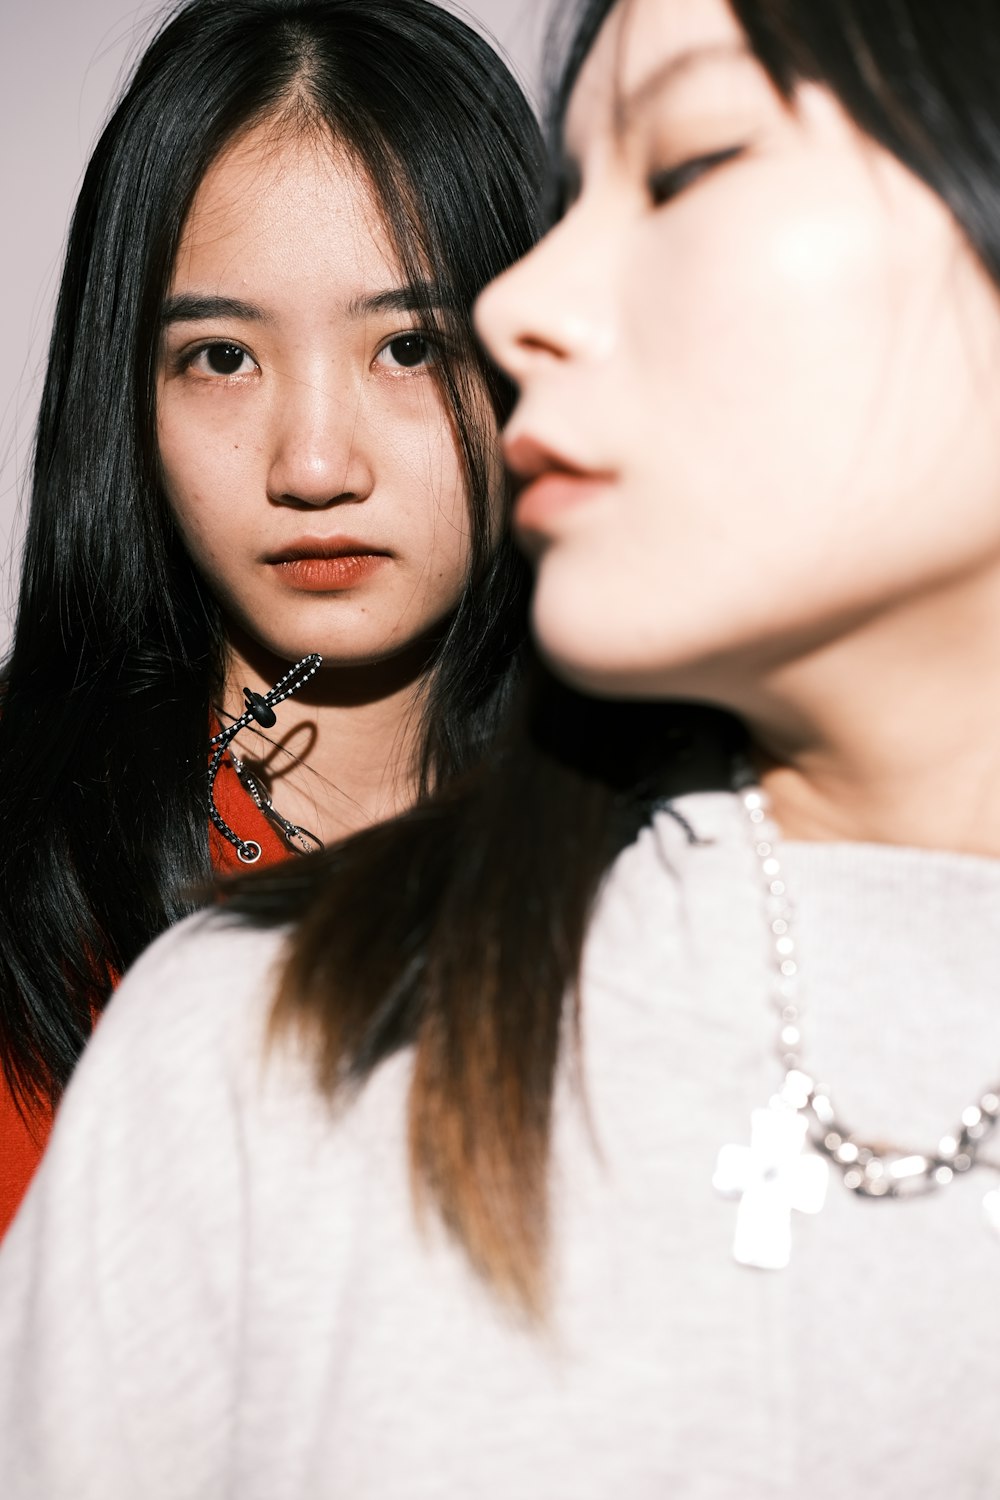 two women standing next to each other with a necklace on